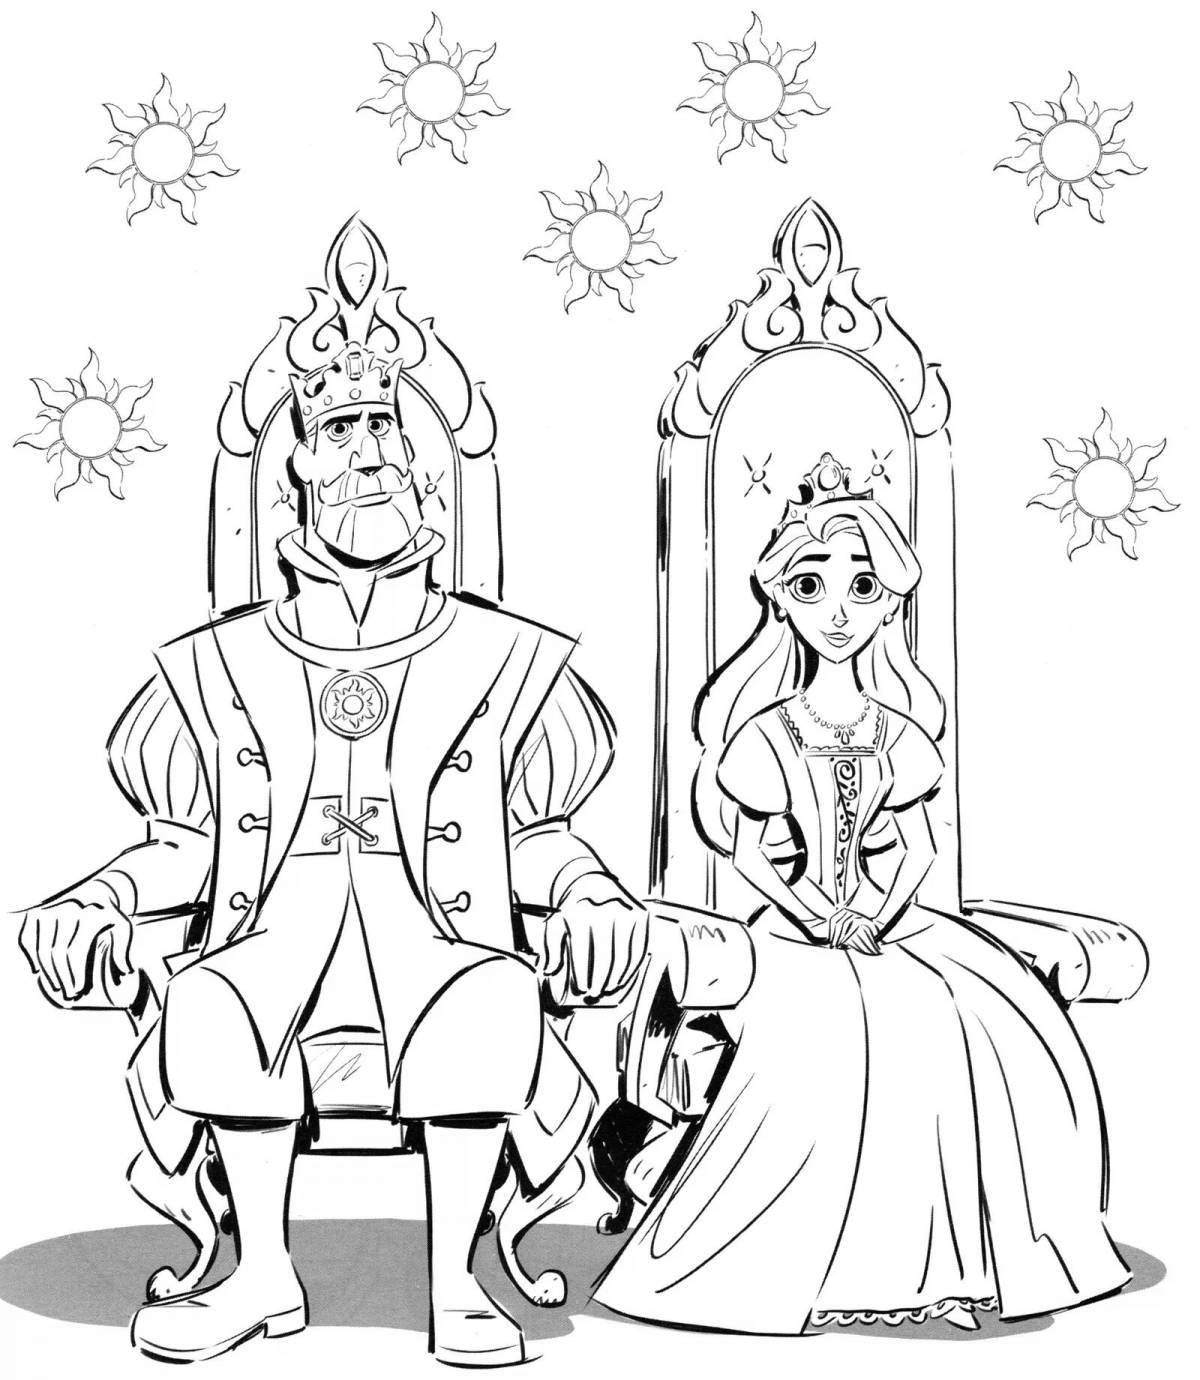 Coloring page magnanimous king and queen